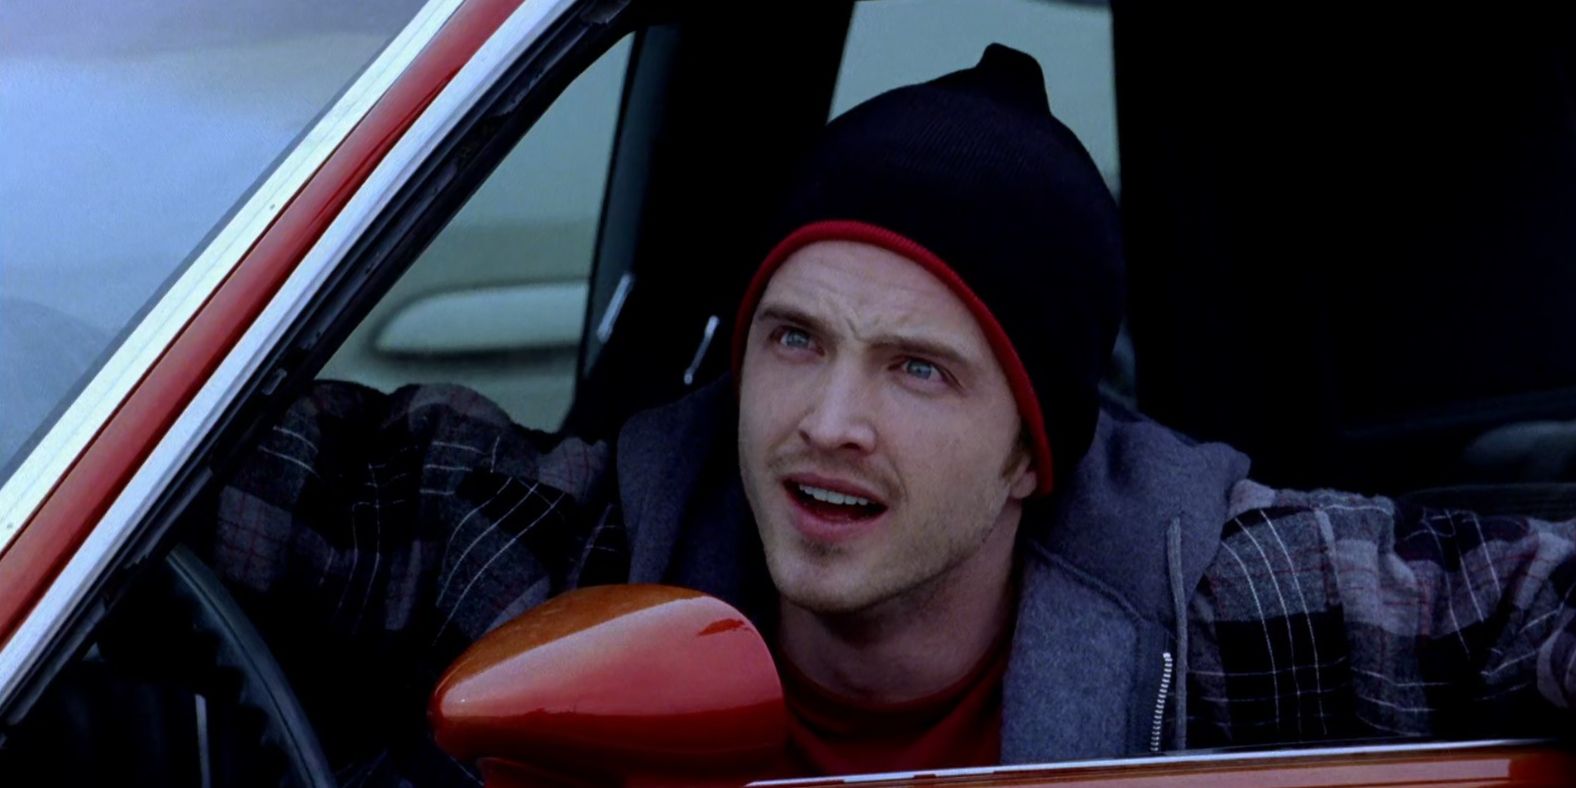 jesse in his car in the pilot episode of breaking bad